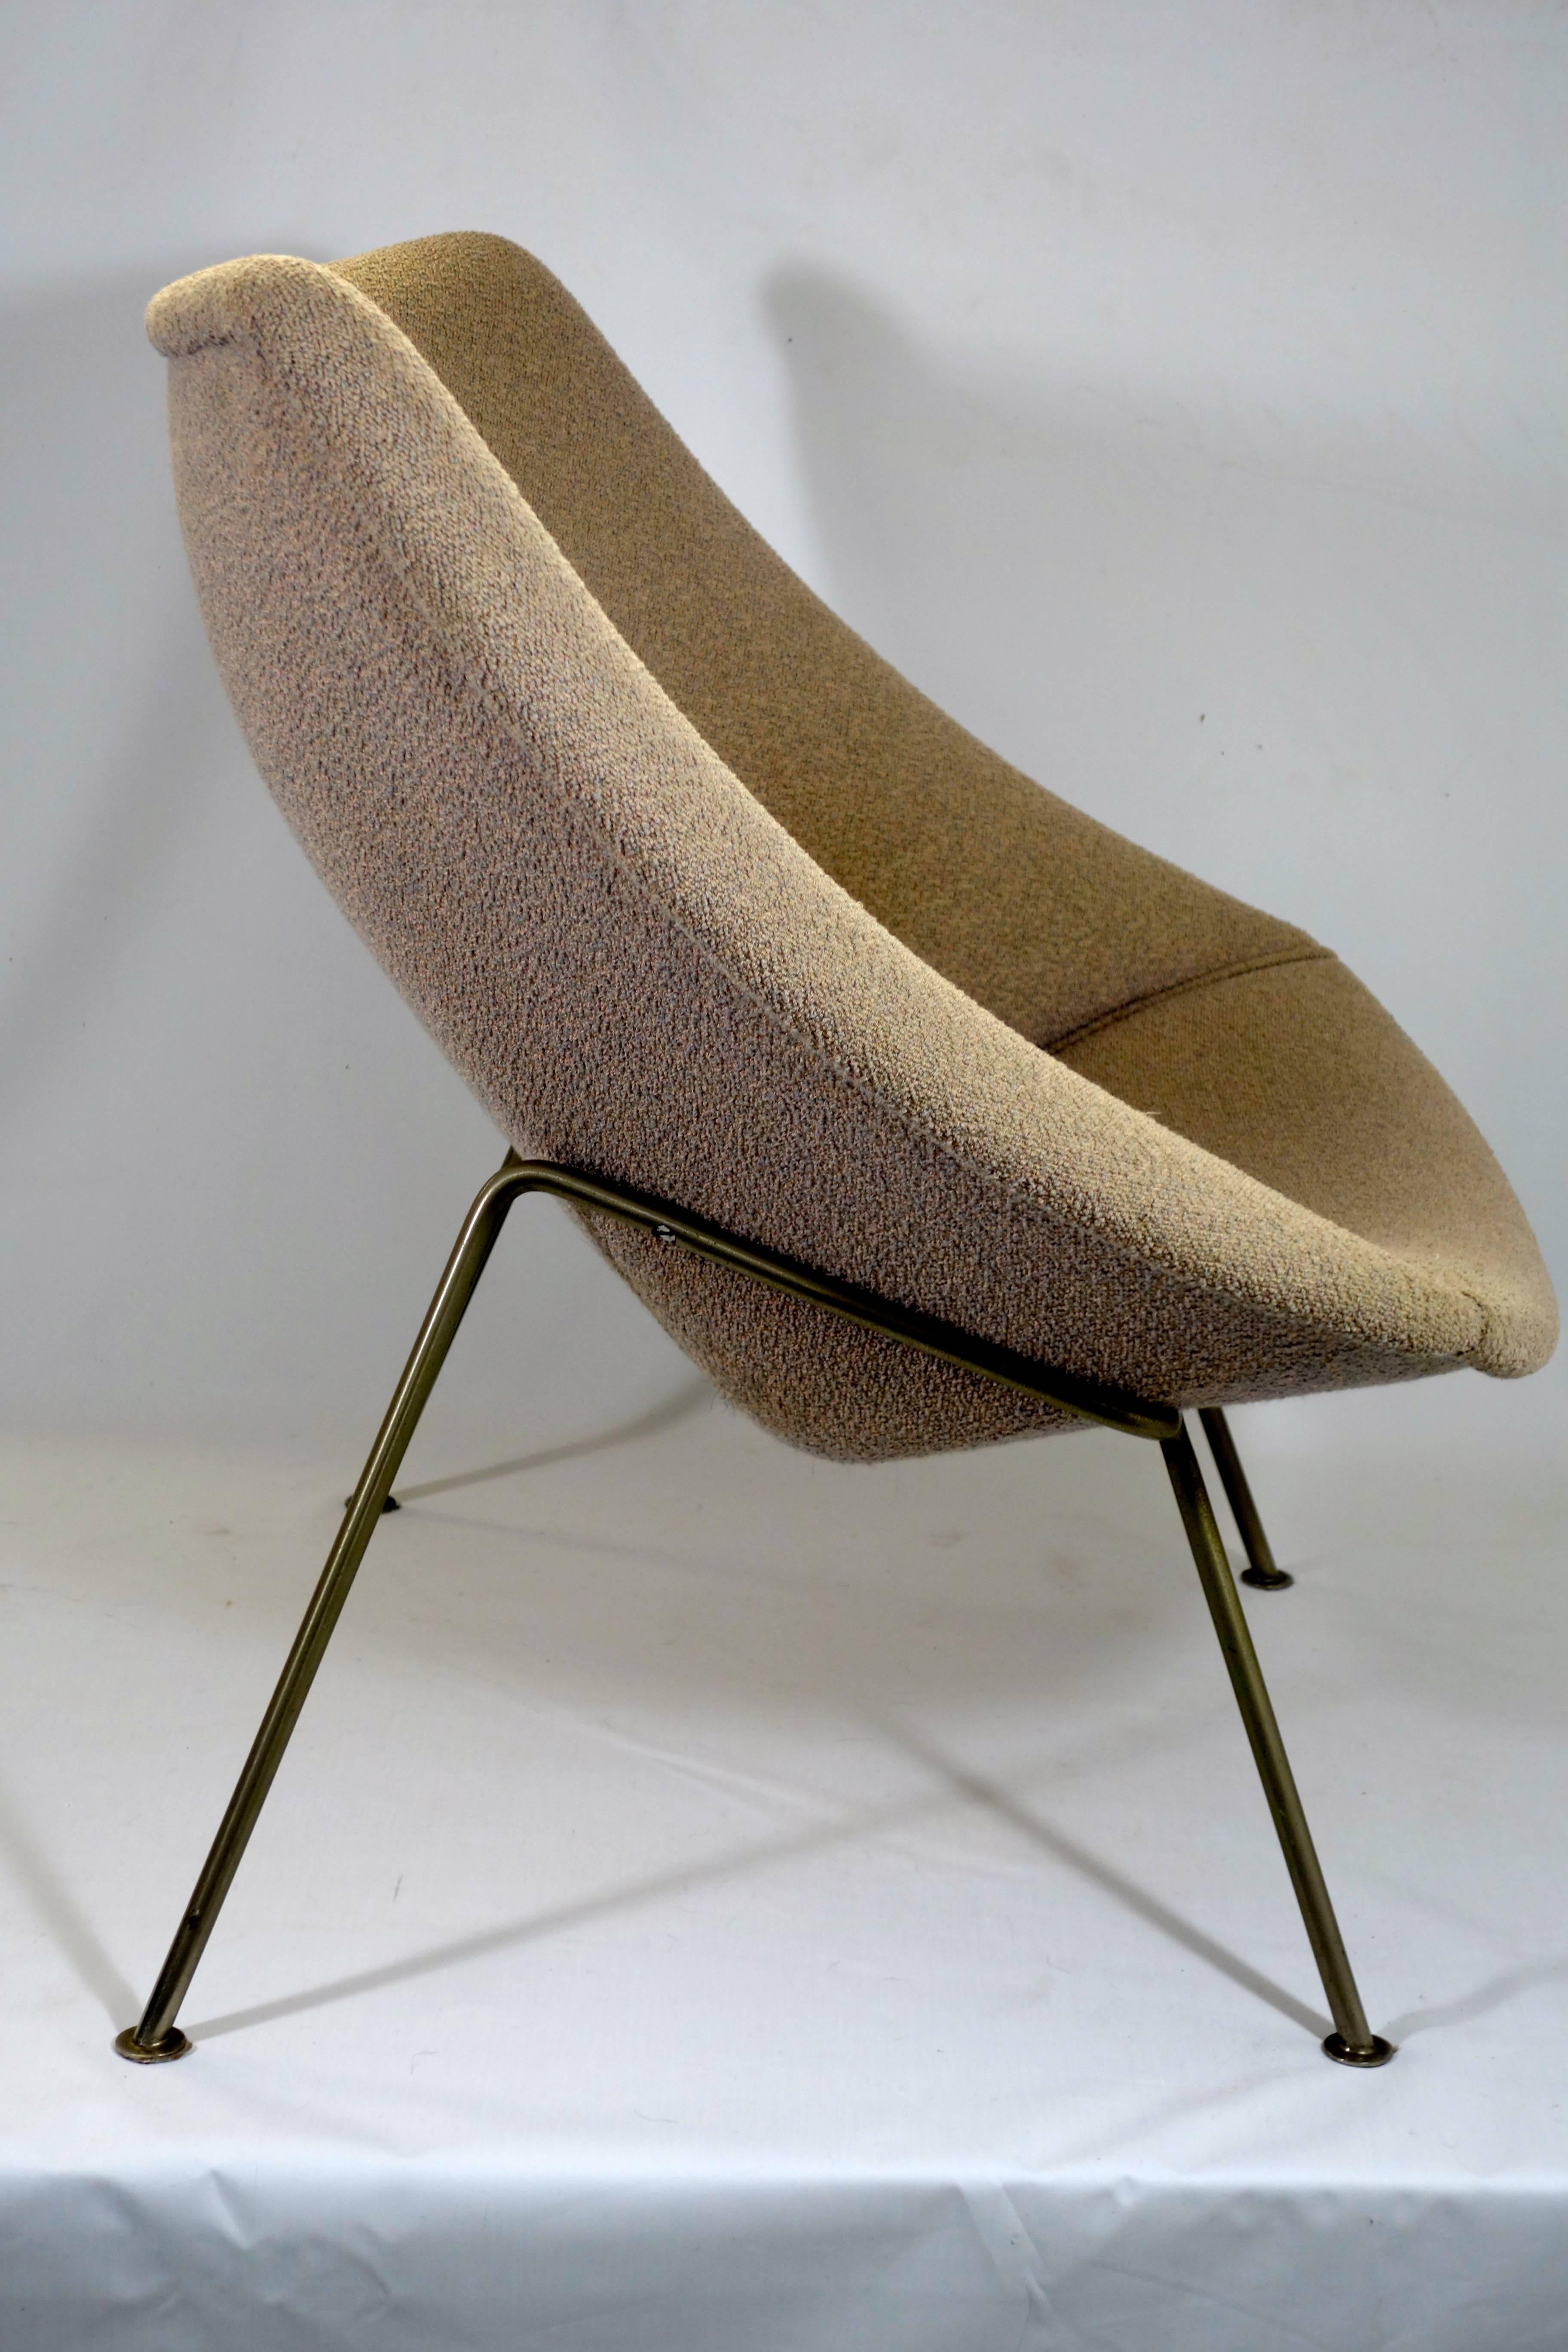 Midcentury Modern Easy Chair Oyster designed by Pierre Paulin for Artifort.

The very elegant Oyster chair was designed in 1960.

This particular Oyster has a fabric of mixed wool and is in a lovely vintage condition.